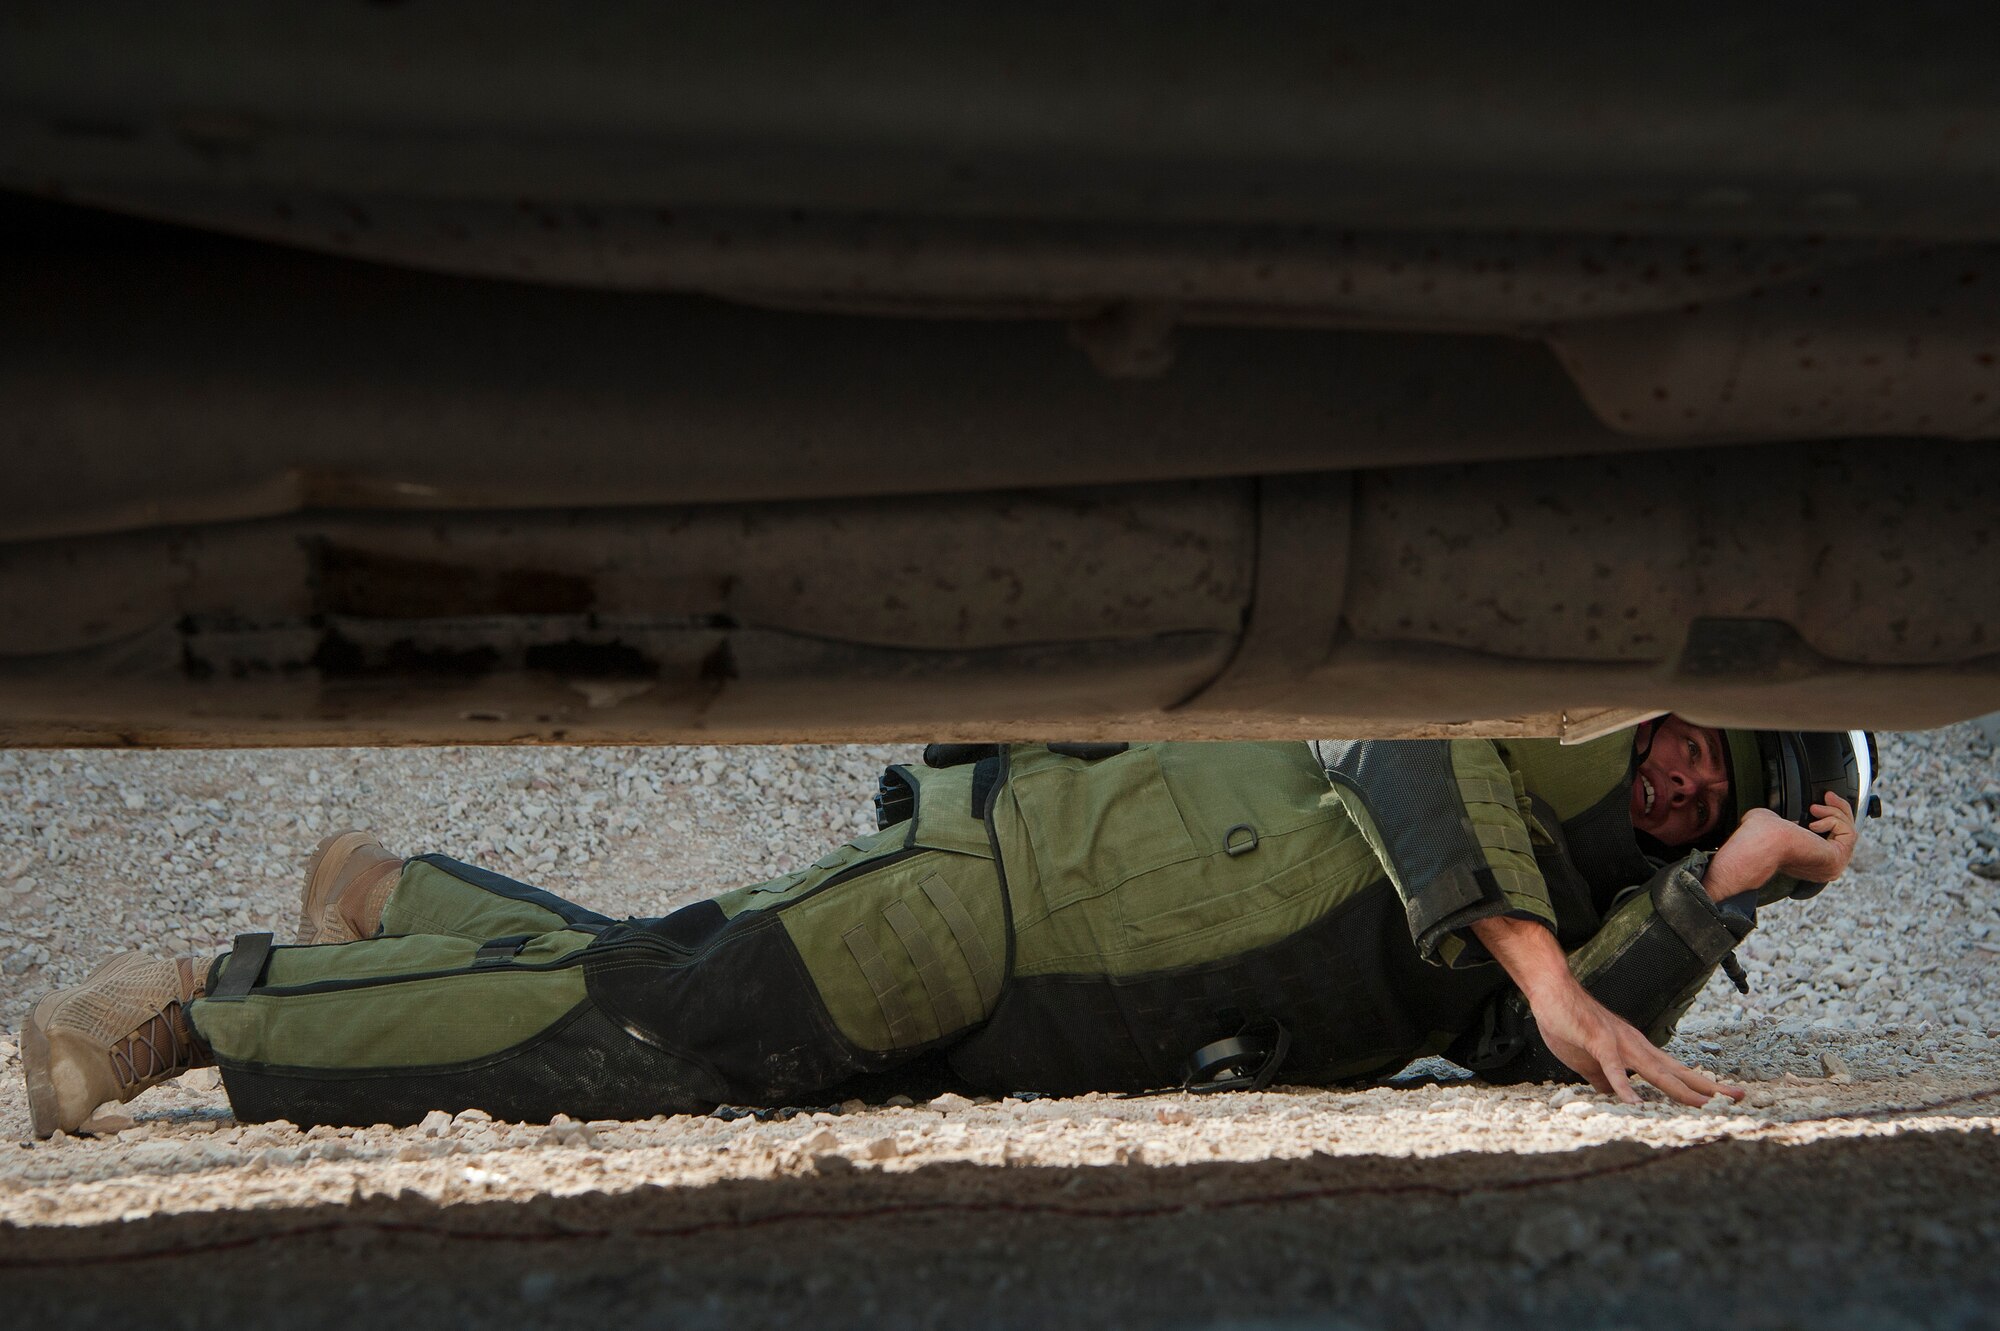 Tech. Sgt. Michael Case, 379th Expeditionary Civil Engineer Squadron explosive, ordnance, and disposal (EOD) team member, searches under a vehicle while suited in an EOD 10 Bomb Suit, during a vehicle borne improvised explosive device (VBIED) response training exercise Dec. 18, 2018, at Al Udeid Air Base, Qatar. Training participants utilized an F6A robotic platform, the bomb suit, and other specific tools to disrupt a VBIED during the exercise. (U.S. Air Force photo by Tech. Sgt. Christopher Hubenthal)